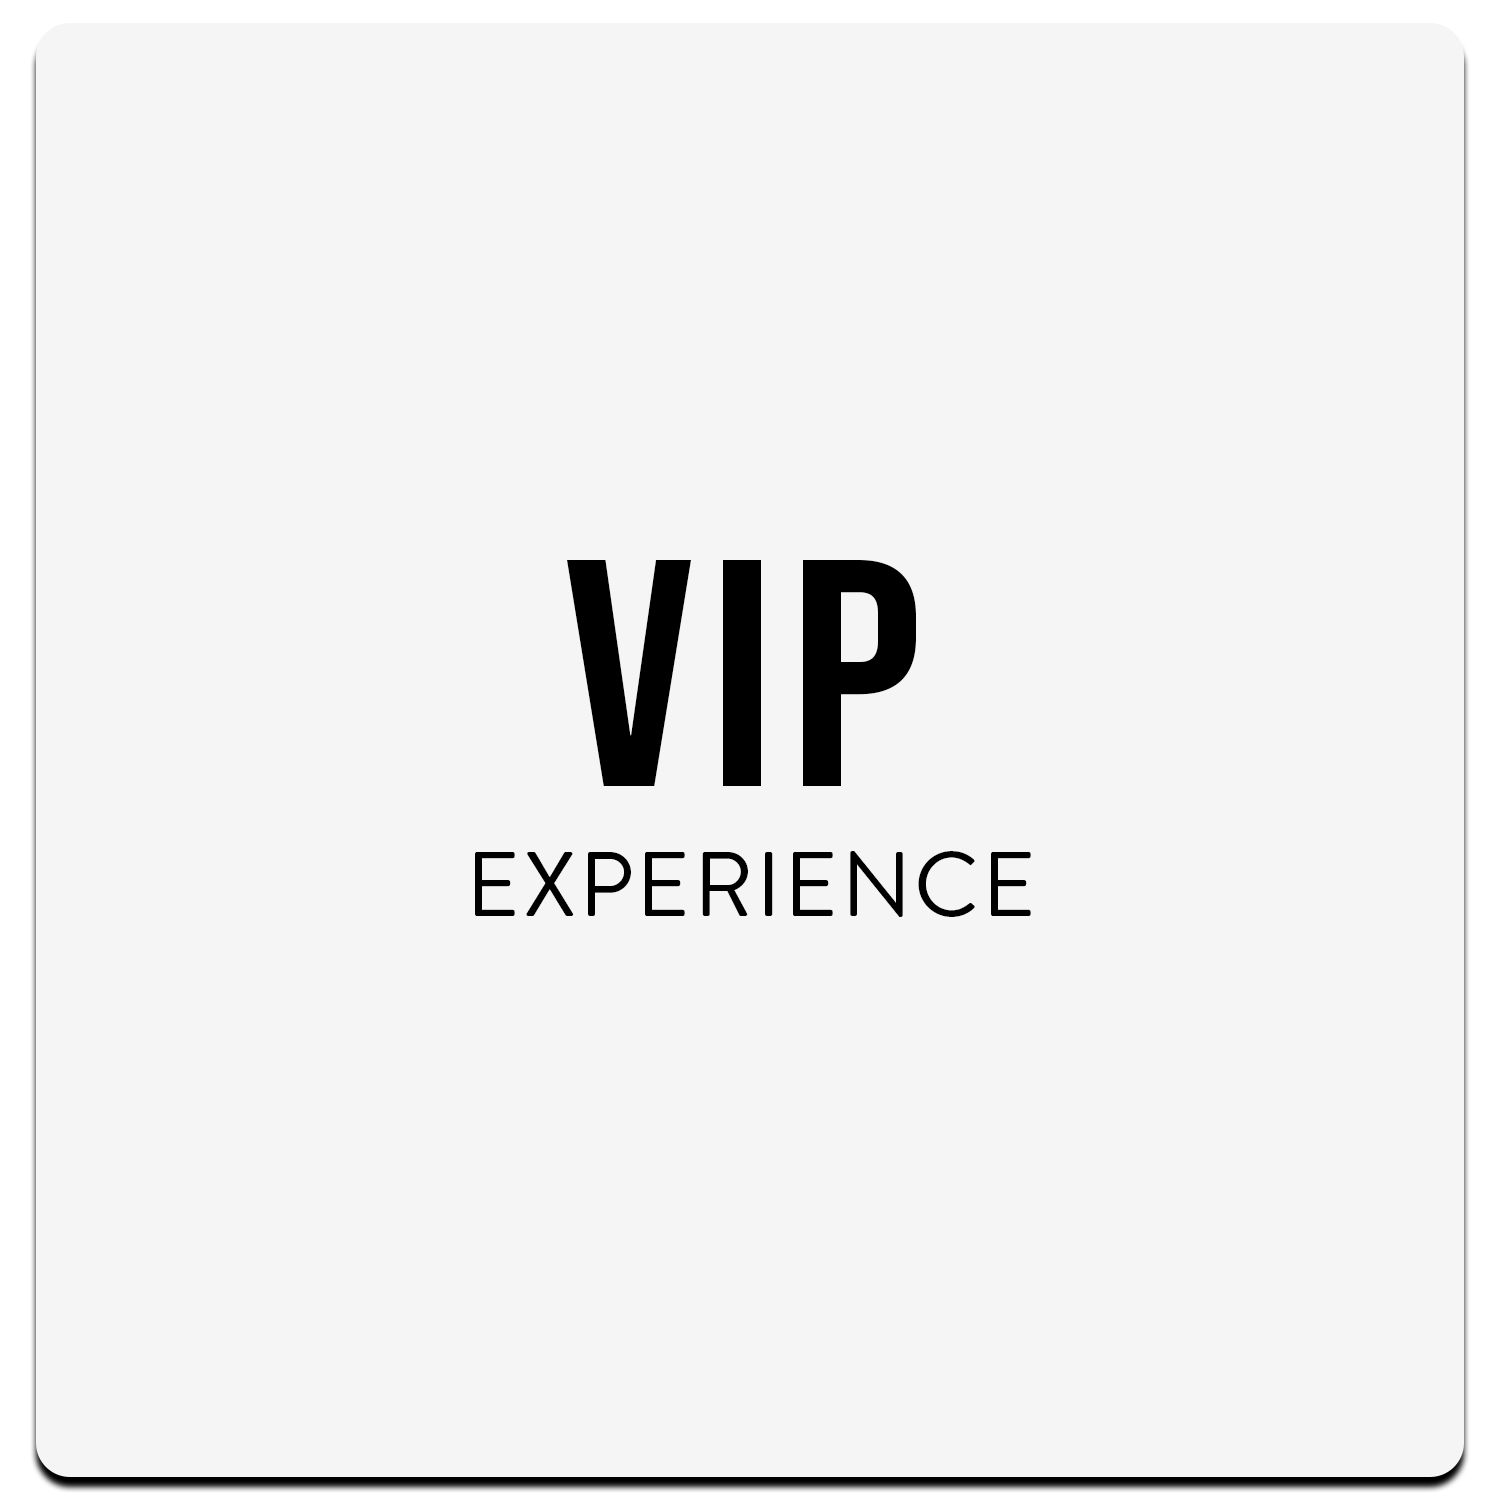 VIP experience.png